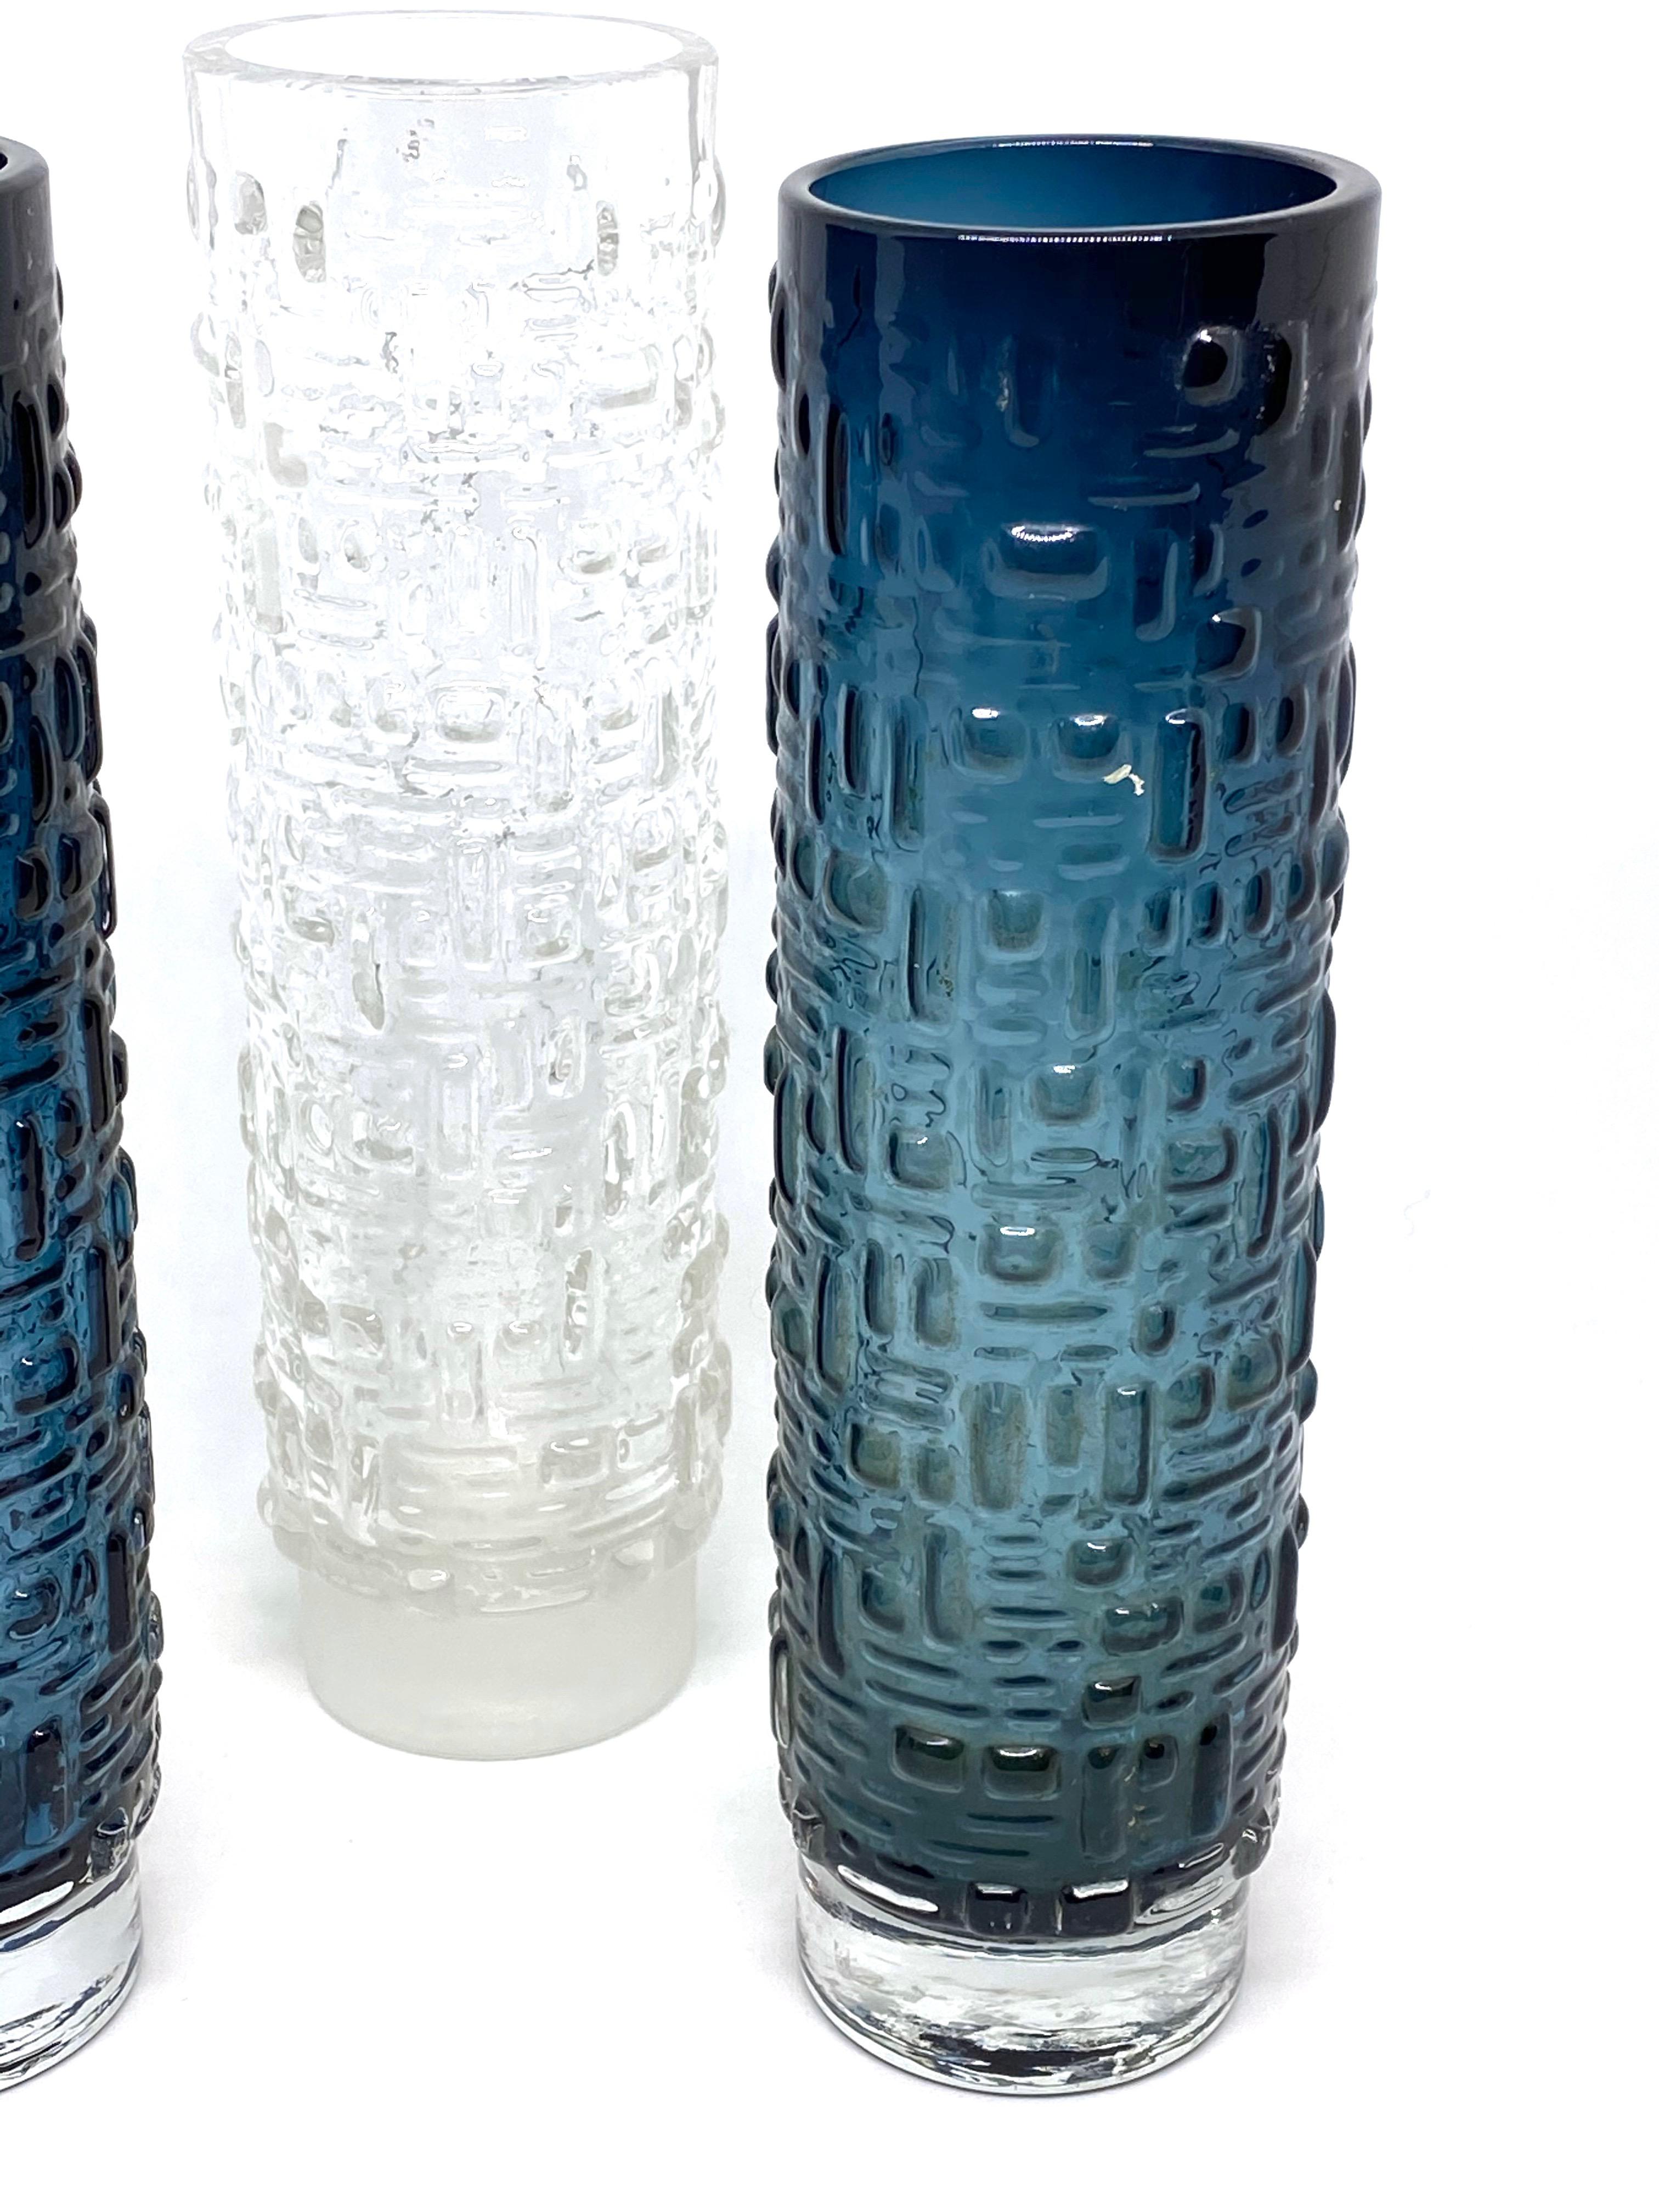 German Set of 3 Glass Vase by Emil Funke for Gral Glass, circa 1970s For Sale